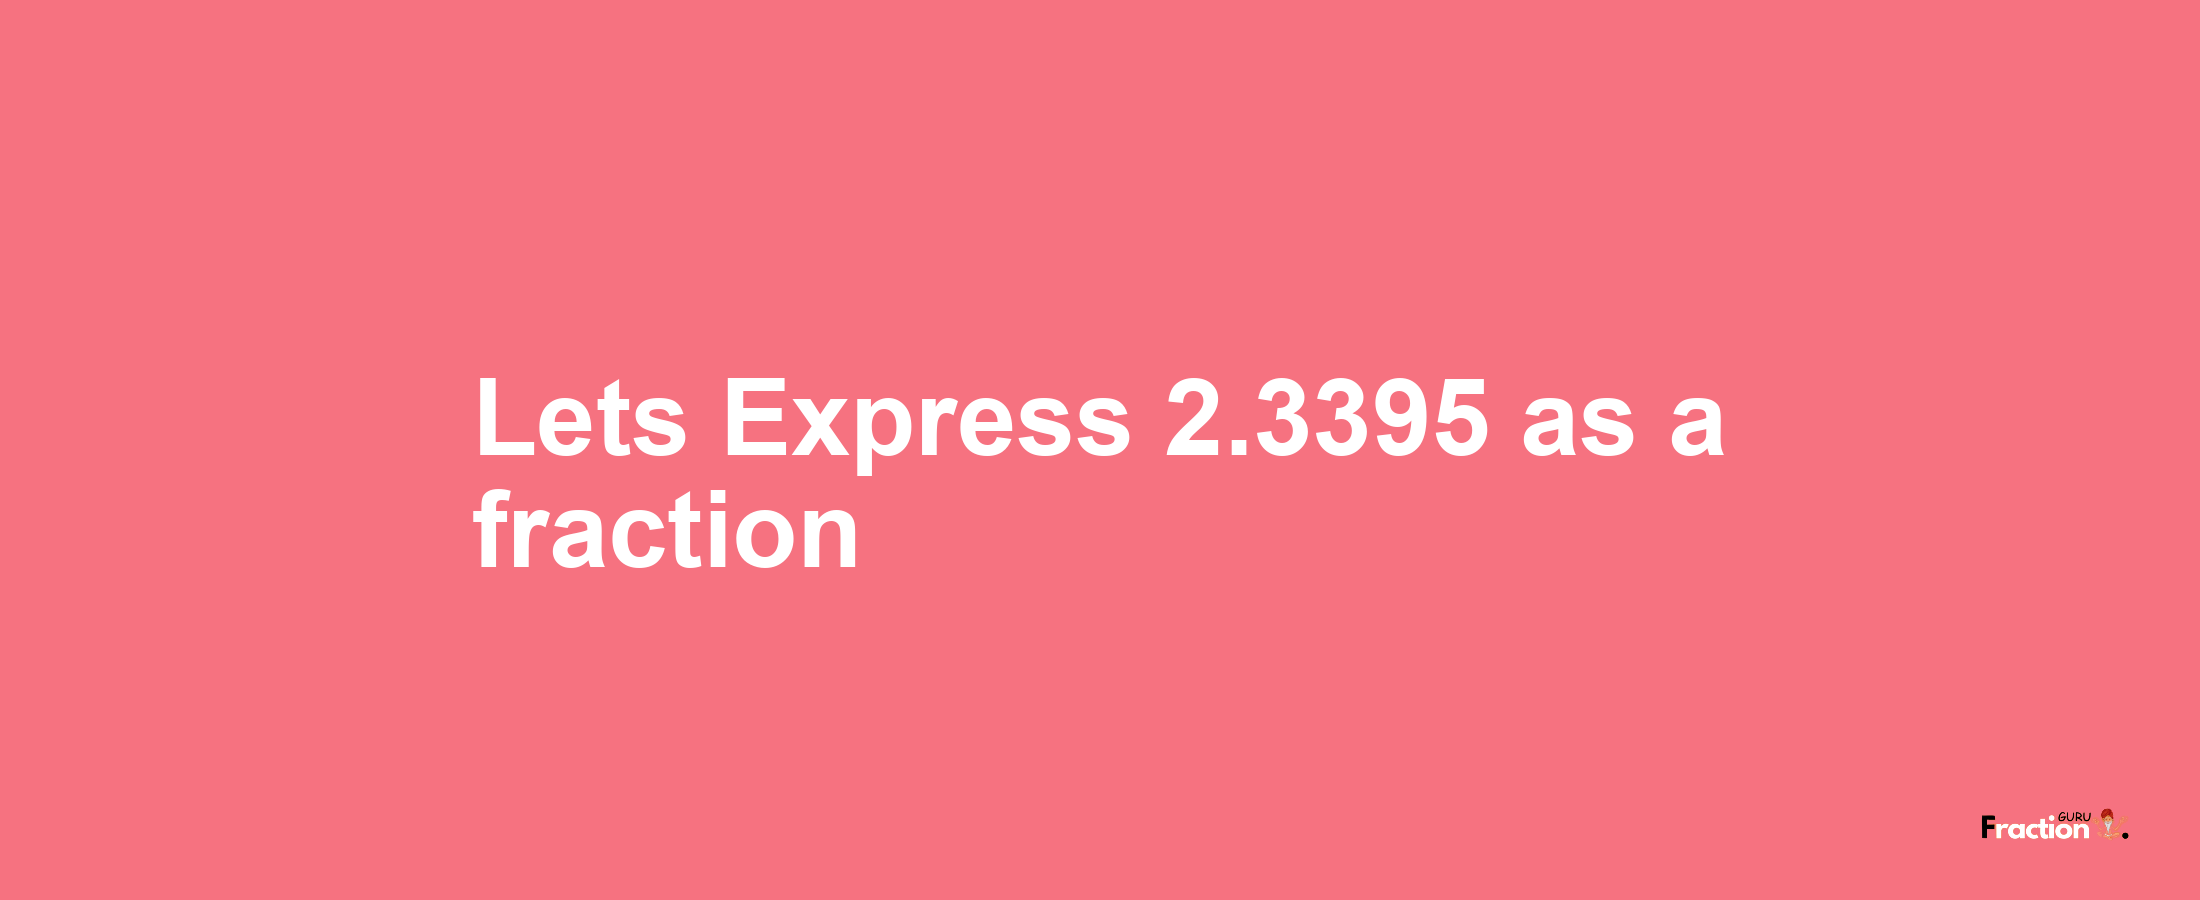 Lets Express 2.3395 as afraction